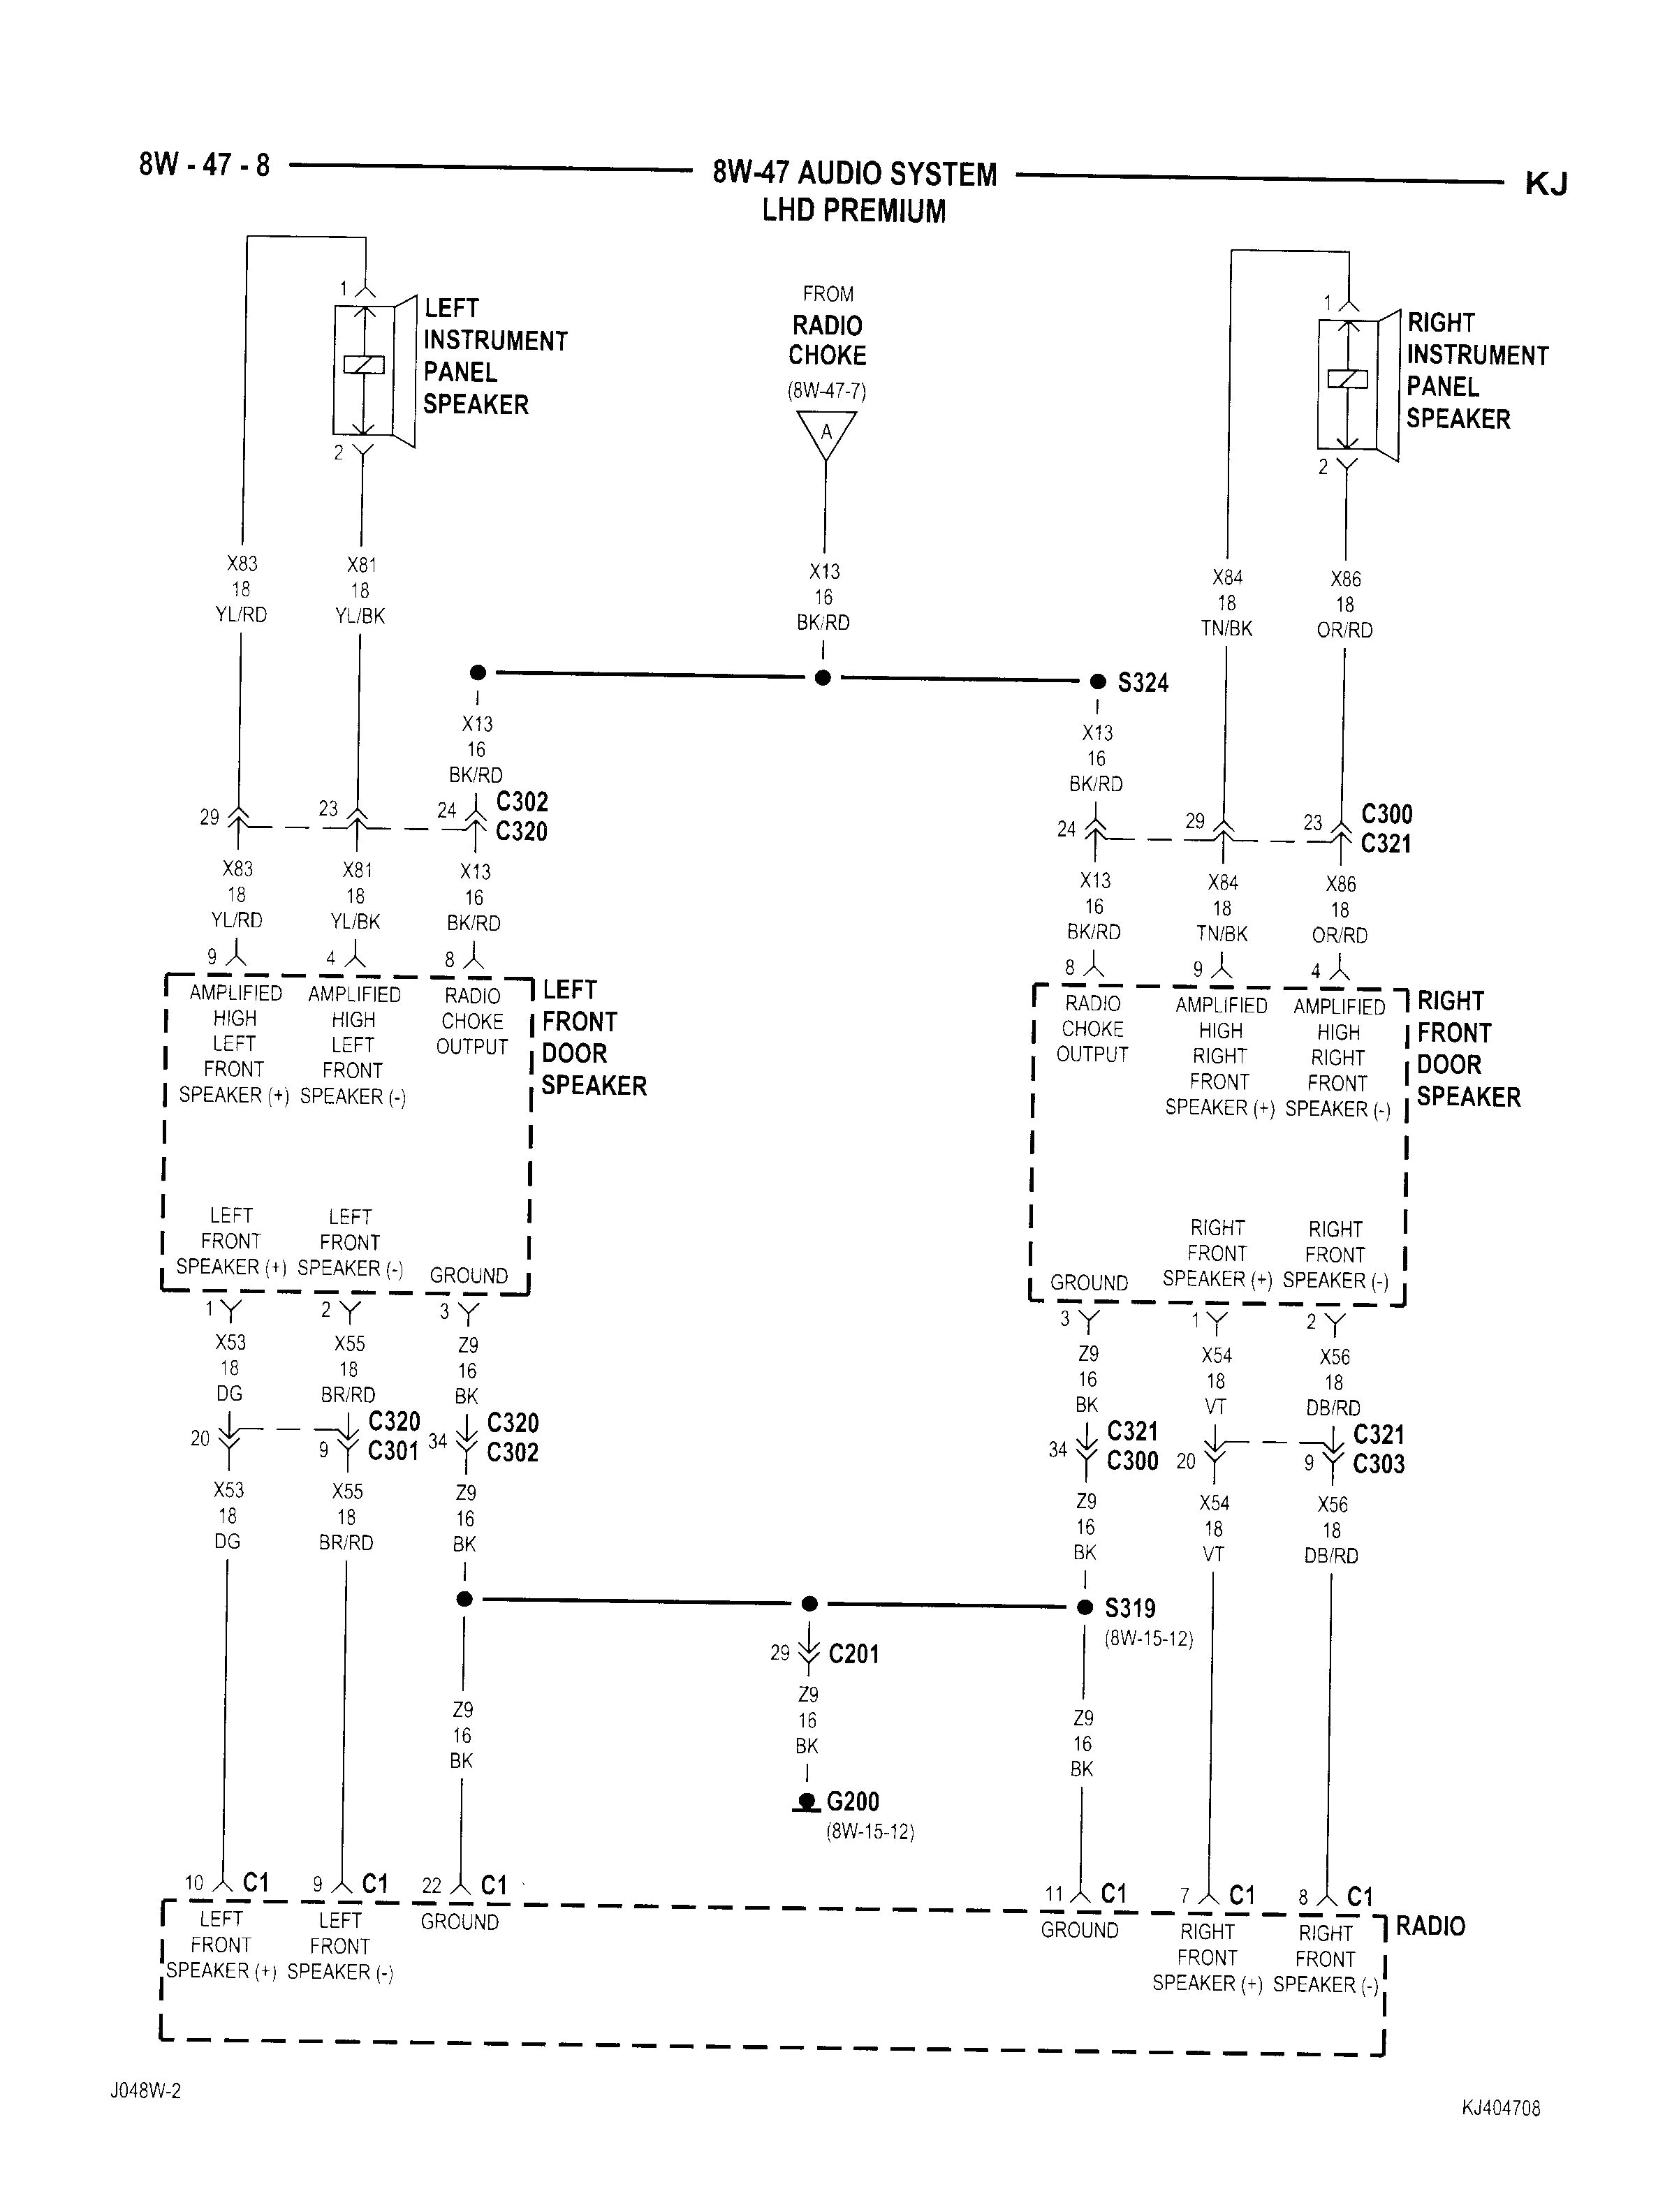 2007 jeep liberty wiring harness wiring diagram meta 2007 jeep liberty wiring diagram 07 jeep liberty wiring diagram